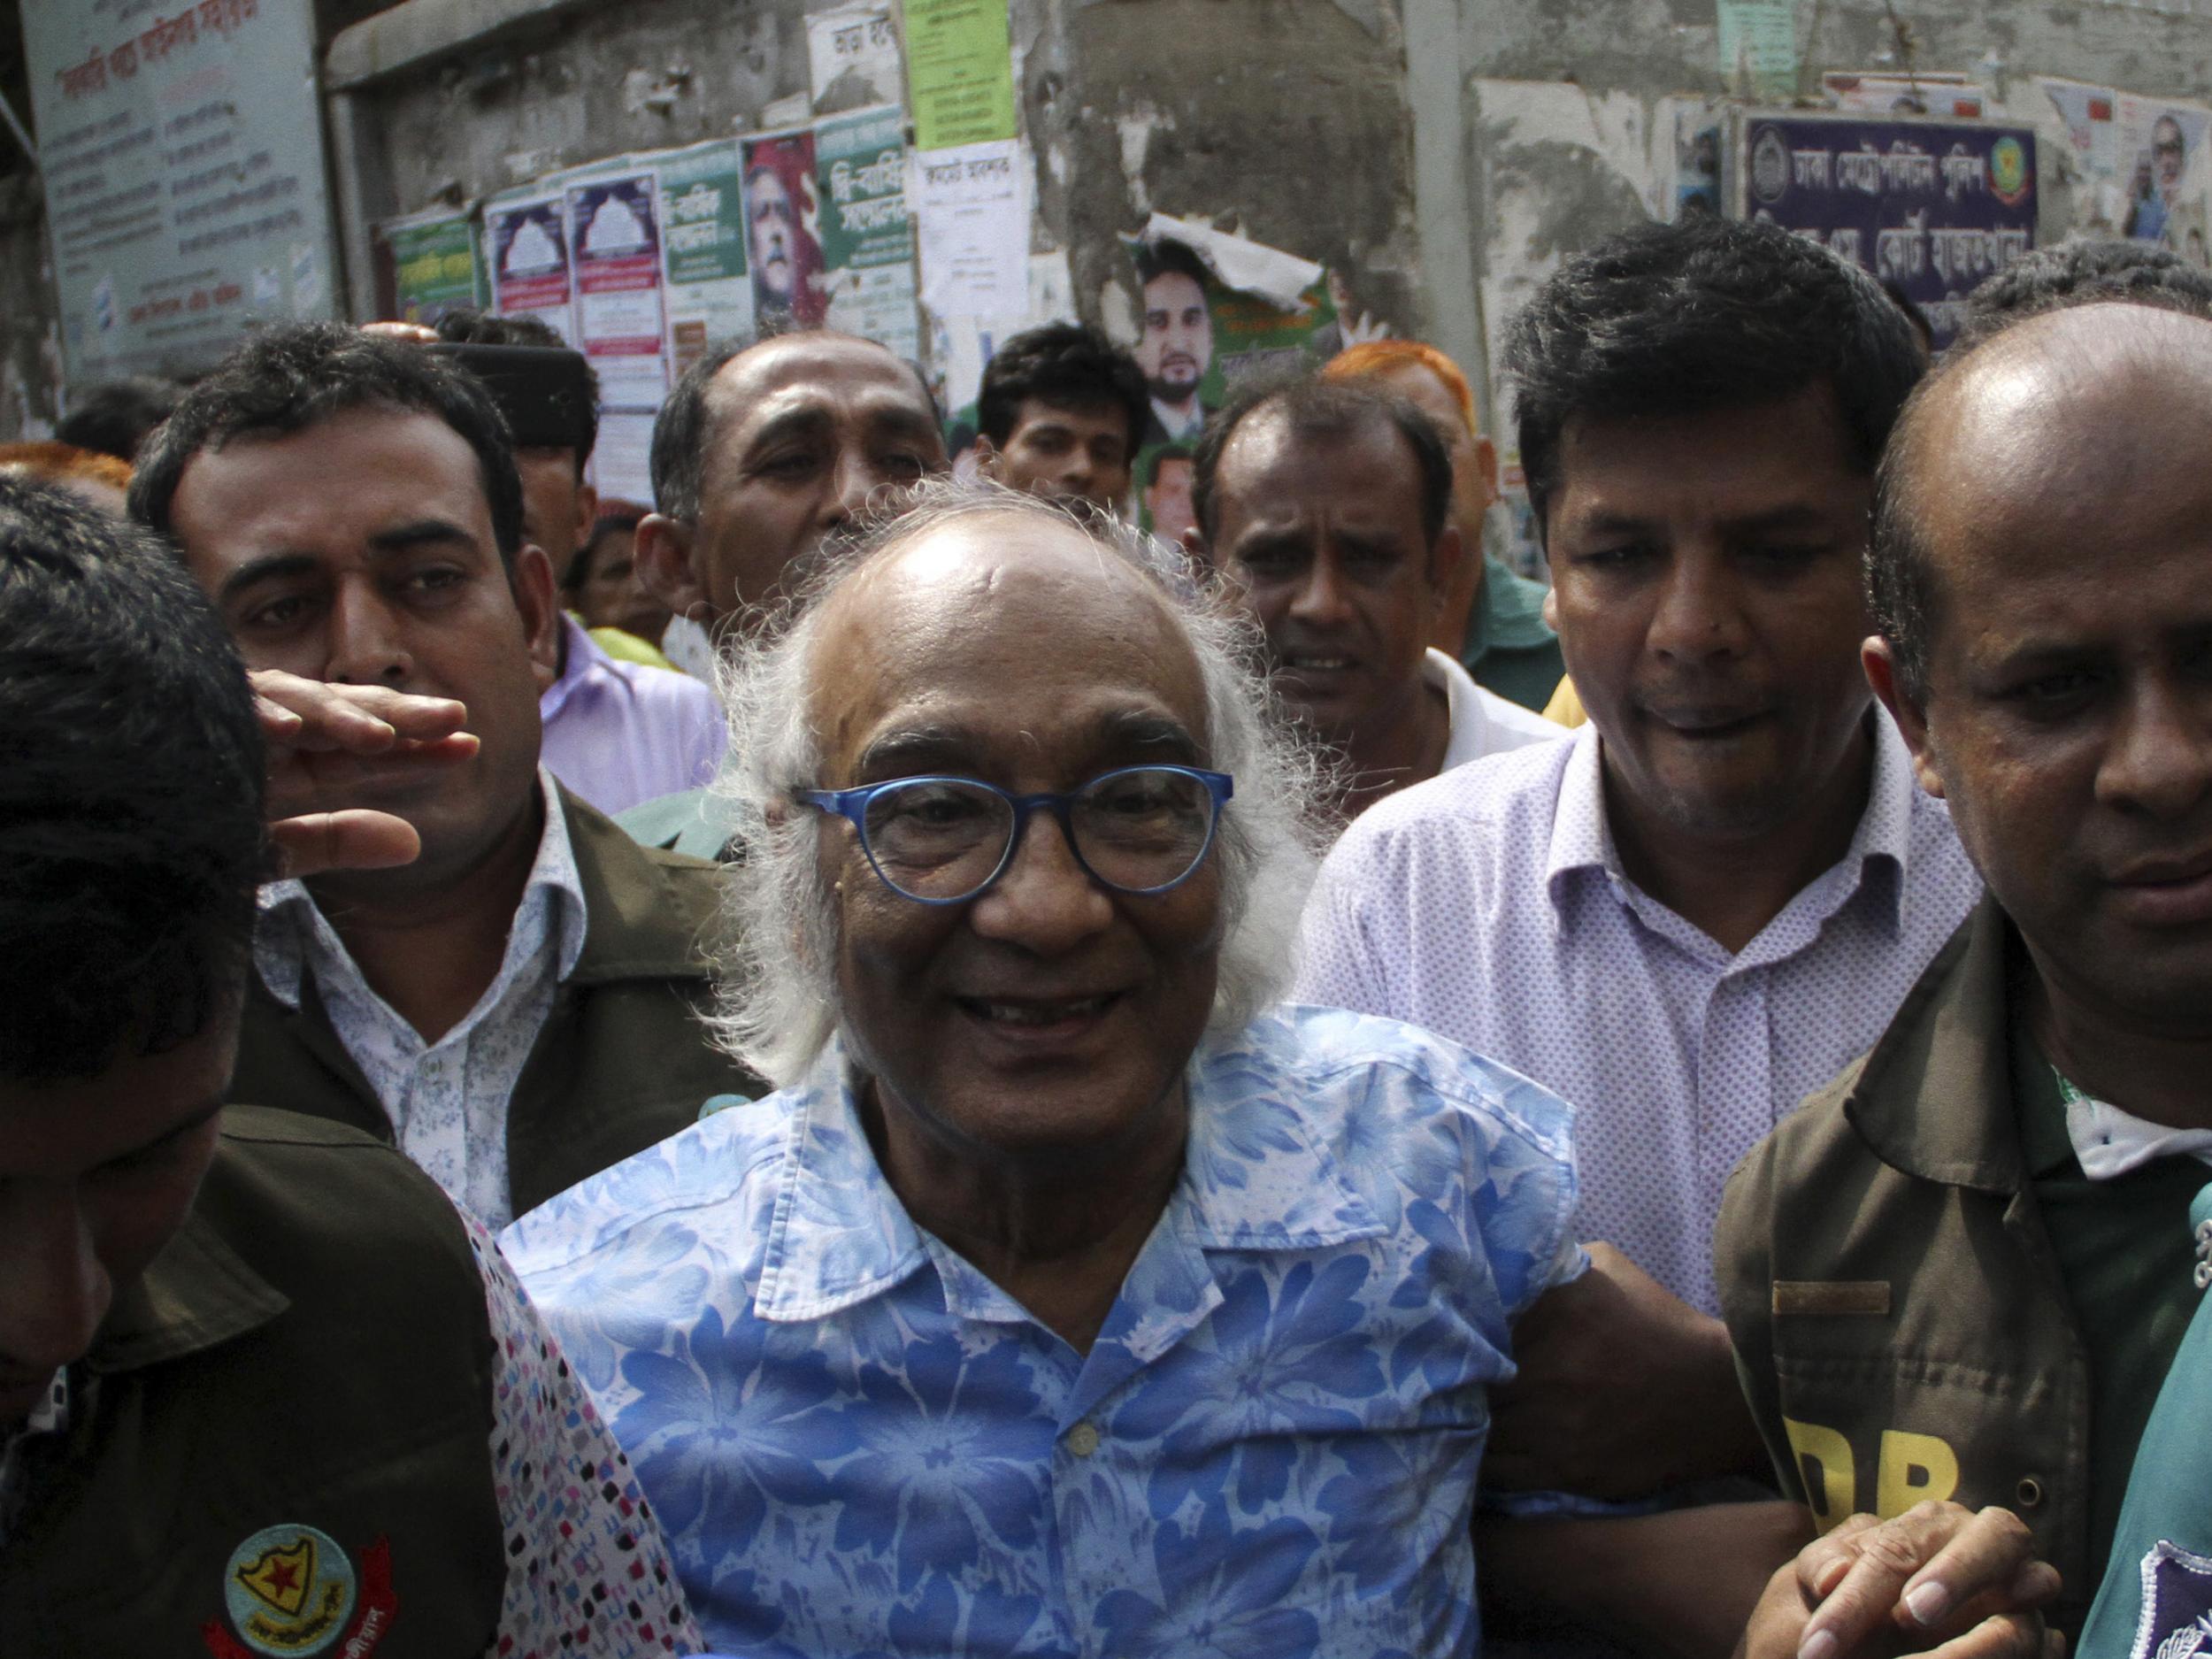 Shafik Rehman has been detained for four months without being charged